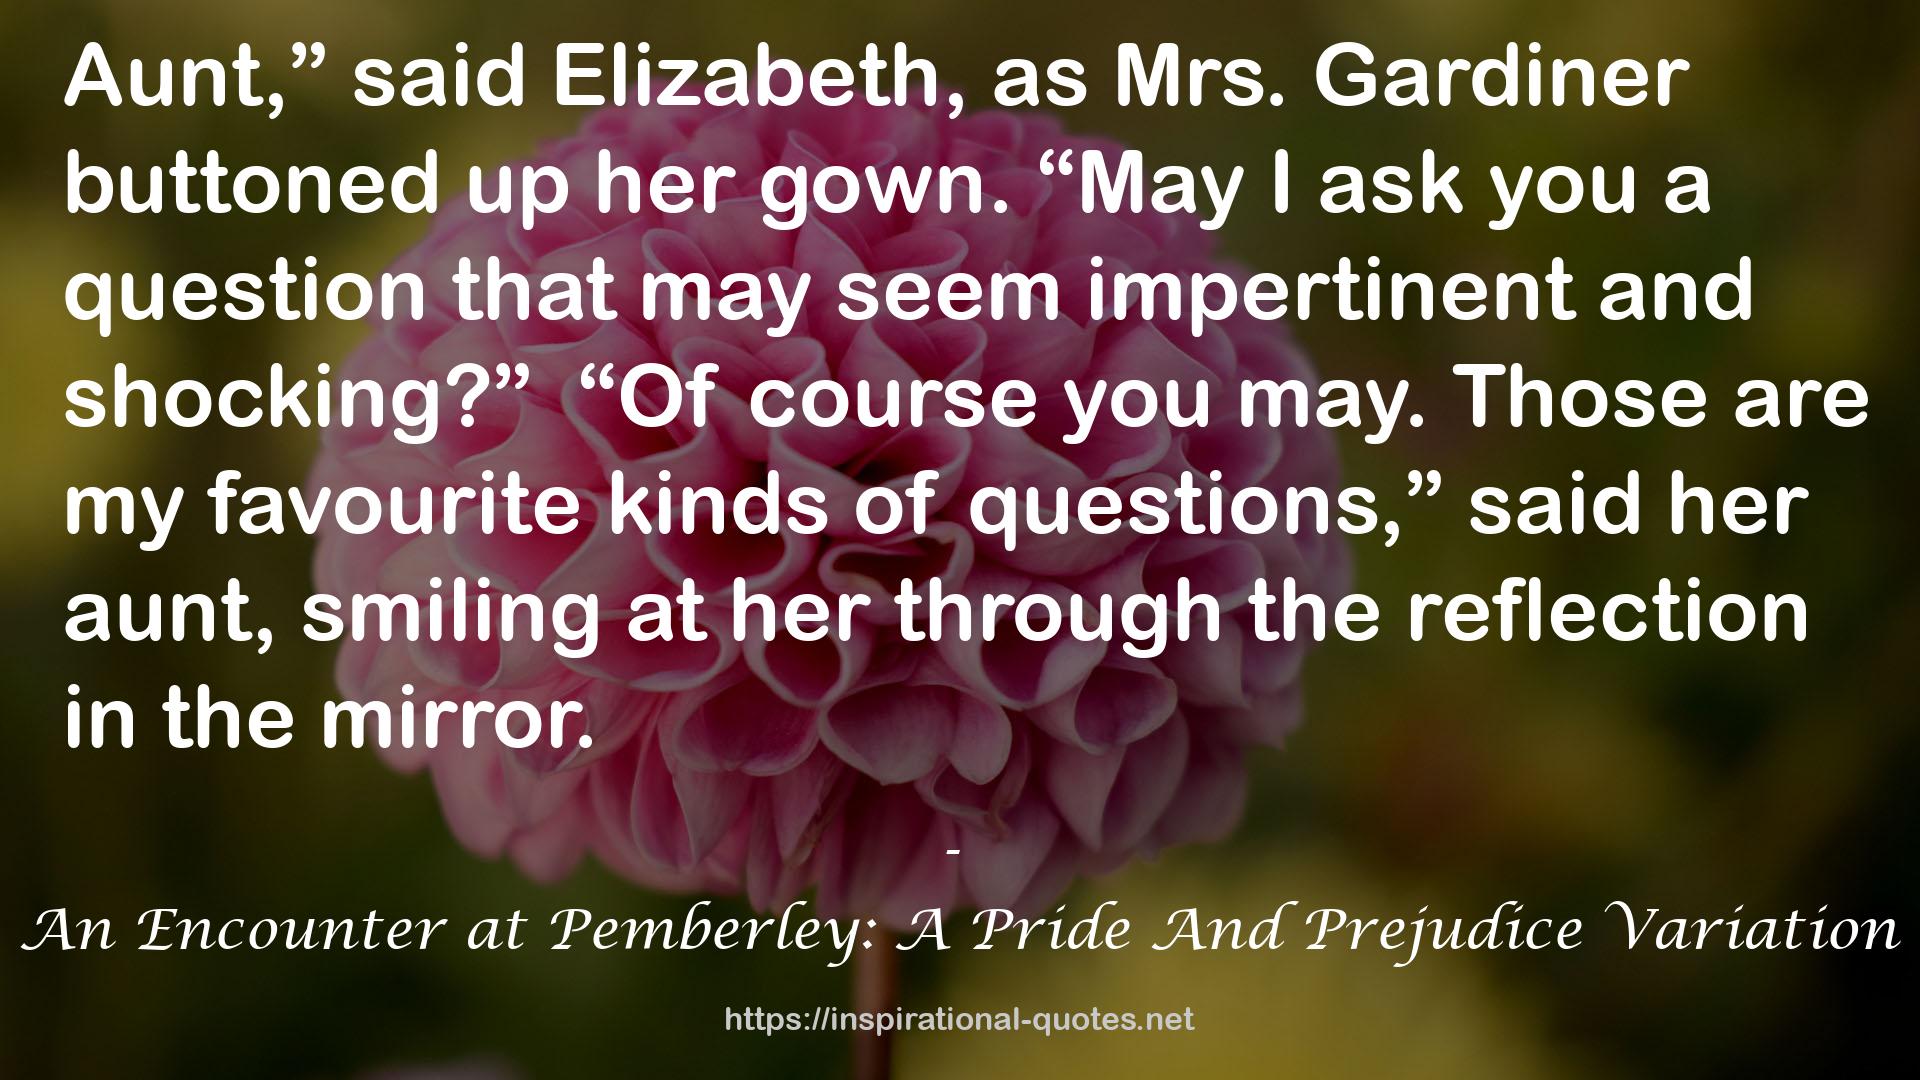 An Encounter at Pemberley: A Pride And Prejudice Variation QUOTES